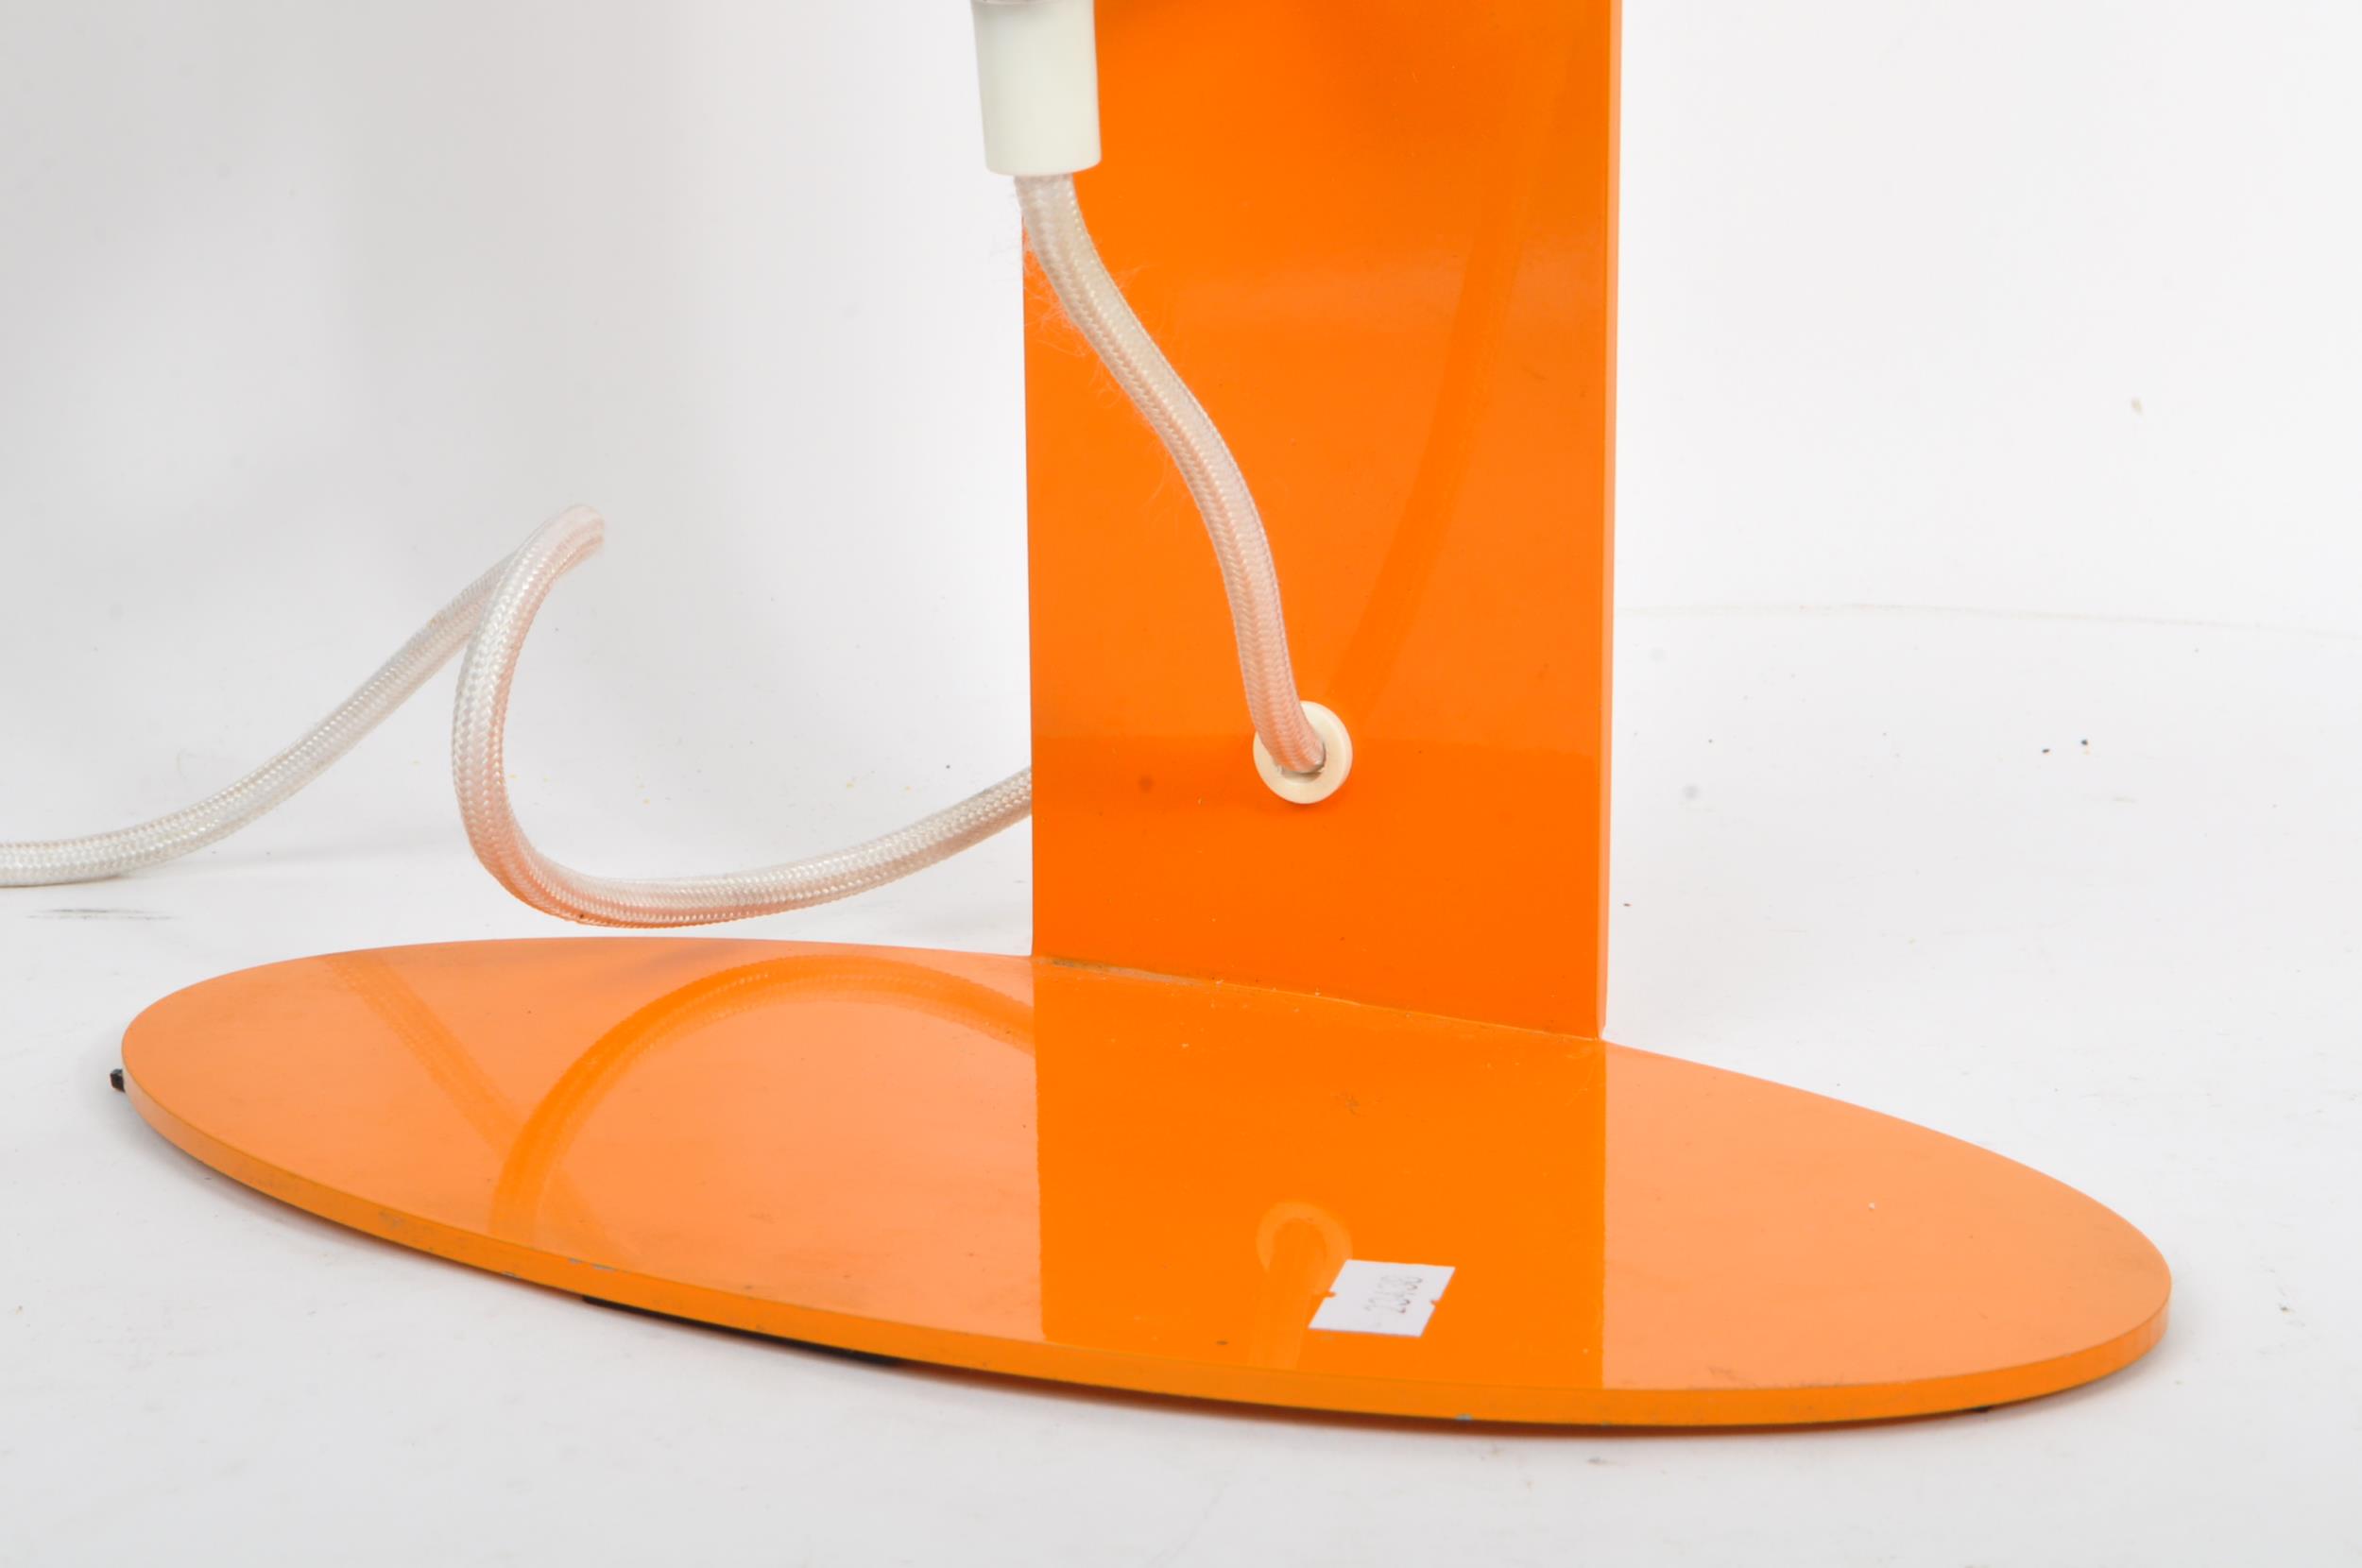 PAIR OF CONTEMPORARY ORANGE RETRO STYLE TABLE LAMPS - Image 7 of 7